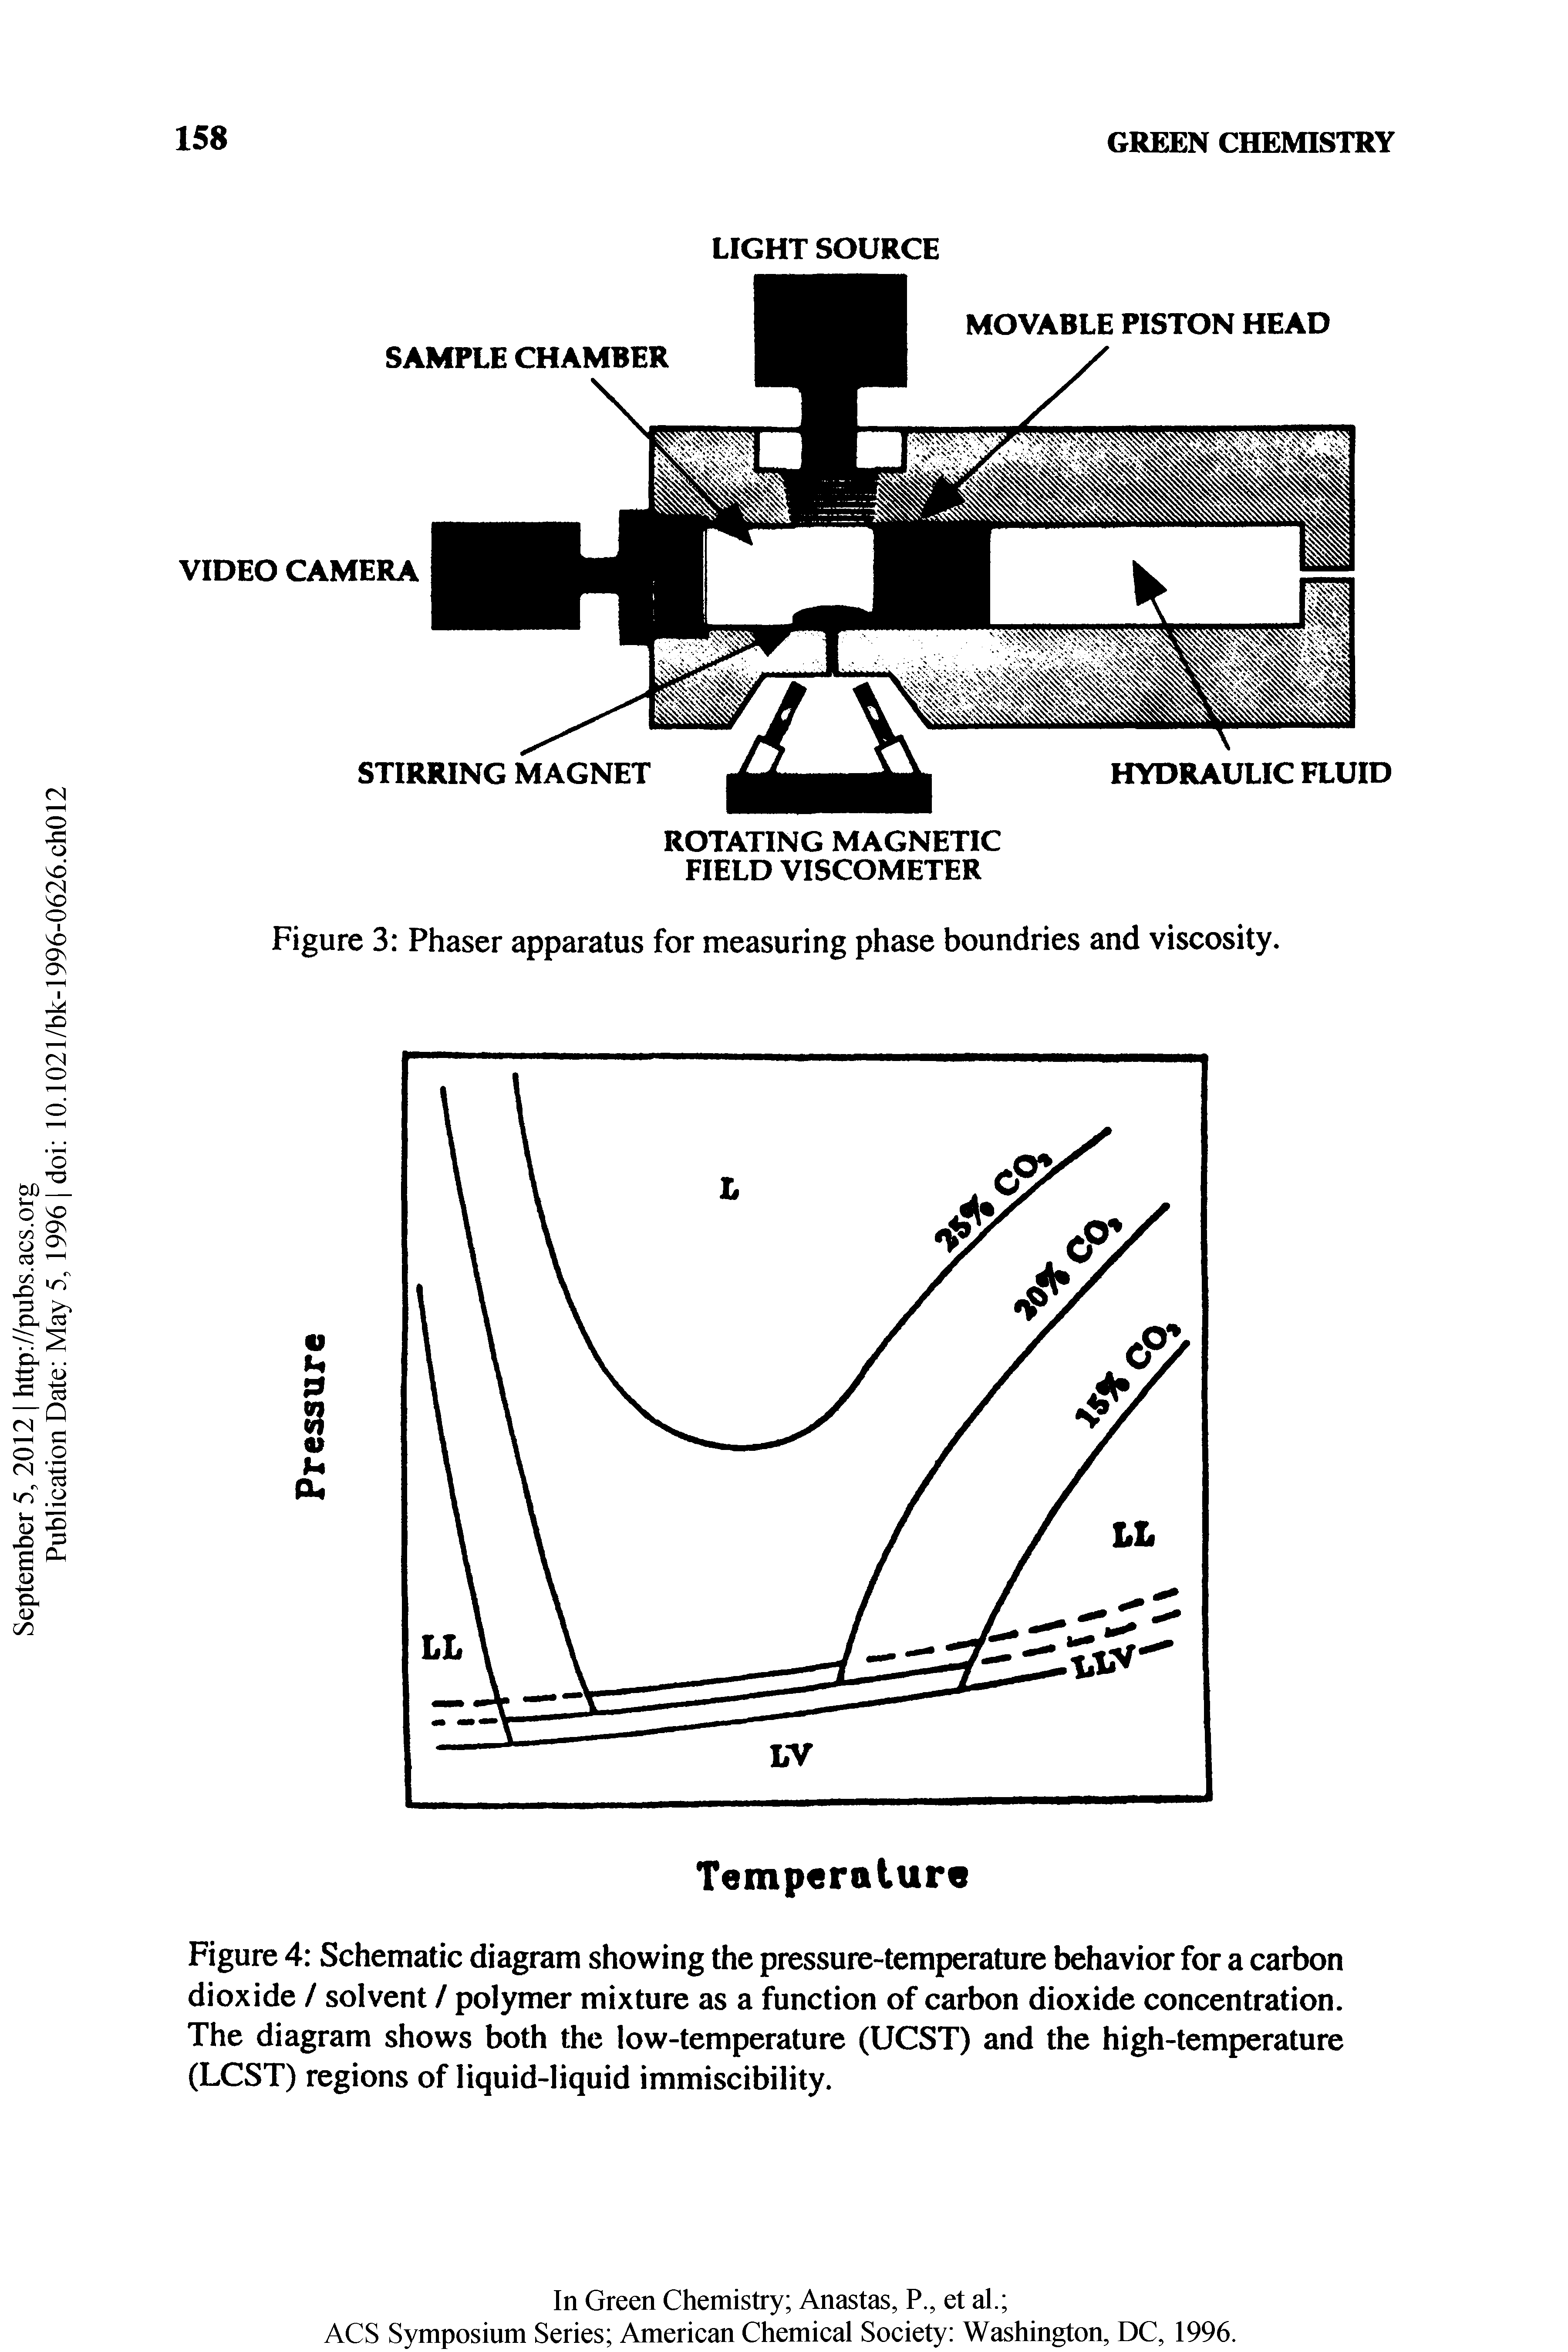 Figure 4 Schematic diagram showing the pressure-temperature behavior for a carbon dioxide / solvent / polymer mixture as a function of carbon dioxide concentration. The diagram shows both the low-temperature (UCST) and the high-temperature (LCST) regions of liquid-liquid immiscibility.